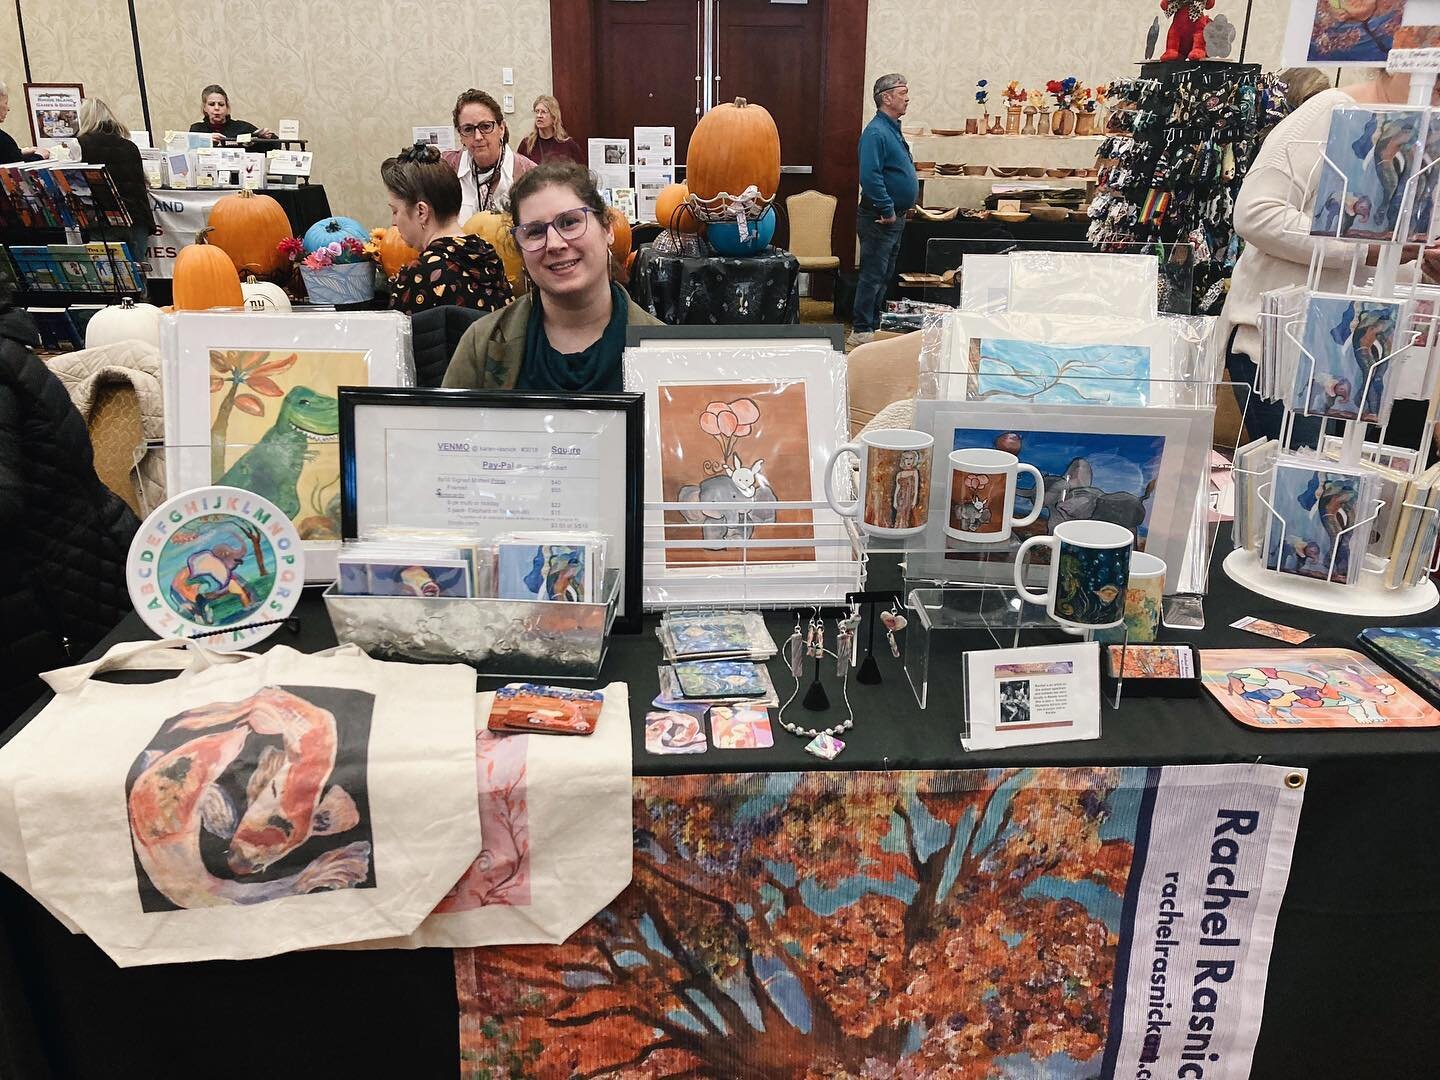 Had a wonderful time at Small Business Saturday this past weekend! Lots of awesome vendors and it was great seeing so many people supporting small businesses